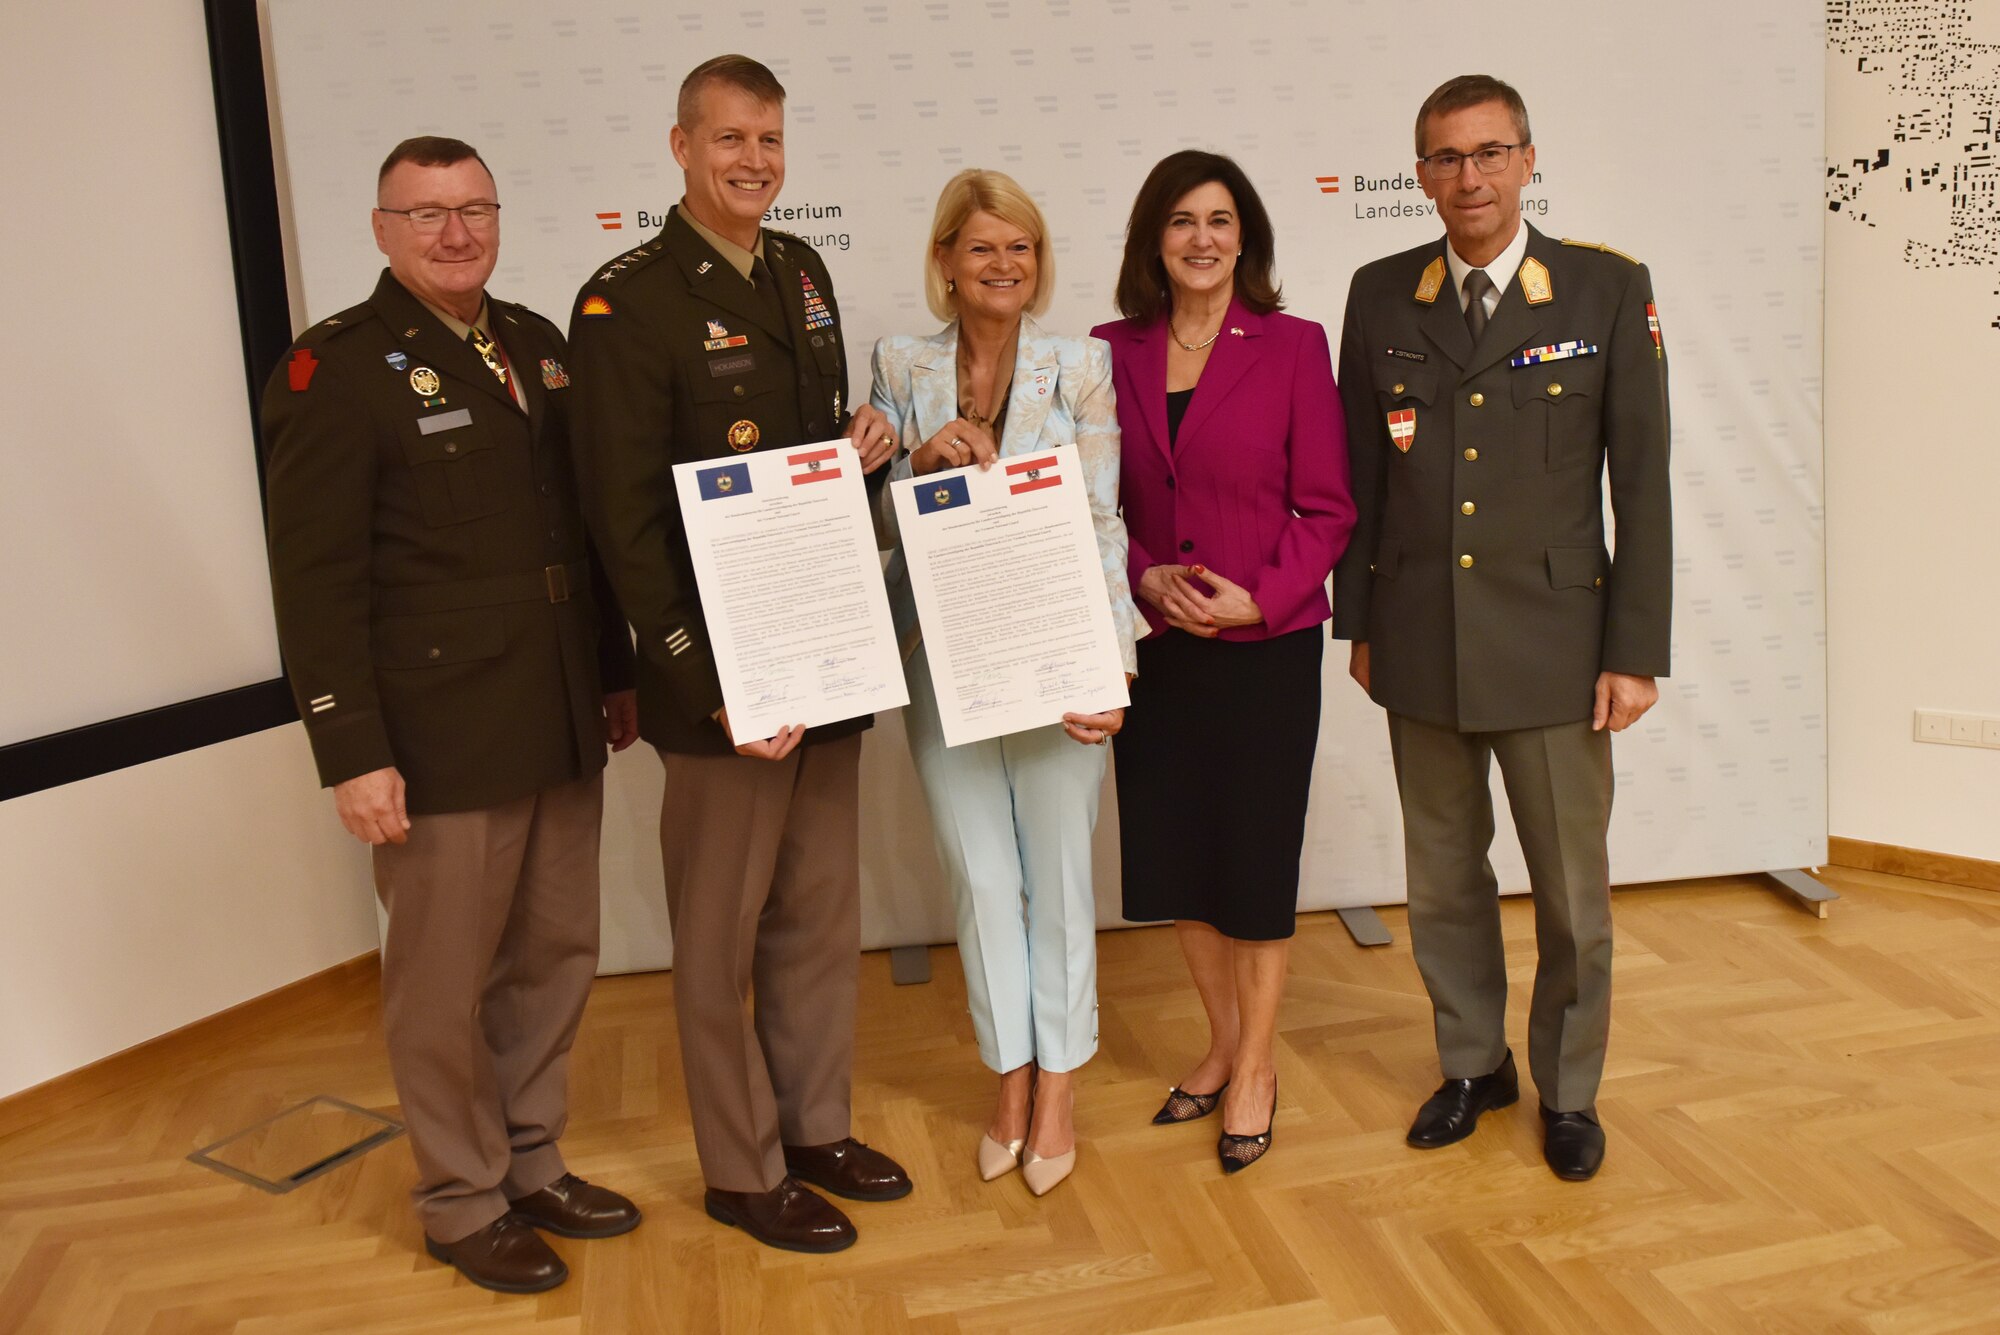 Left to right, U.S. Army Maj. Gen. Gregory Knight, Vermont’s adjutant general; U.S. Army Gen. Daniel Hokanson, chief, National Guard Bureau; Klaudia Tanner, federal minister of defense of the Republic of Austria; U.S. Ambassador to Austria Victoria Kennedy; Lt. Gen. Erich Csitkovits, training director and commandant, National Defence Academy, sign letters of intent between the Vermont National Guard and Republic of Austria July 19, 2022, Vienna, Austria. The Vermont National Guard also has partnerships with North Macedonia, since 1993, and Senegal, since 2008.